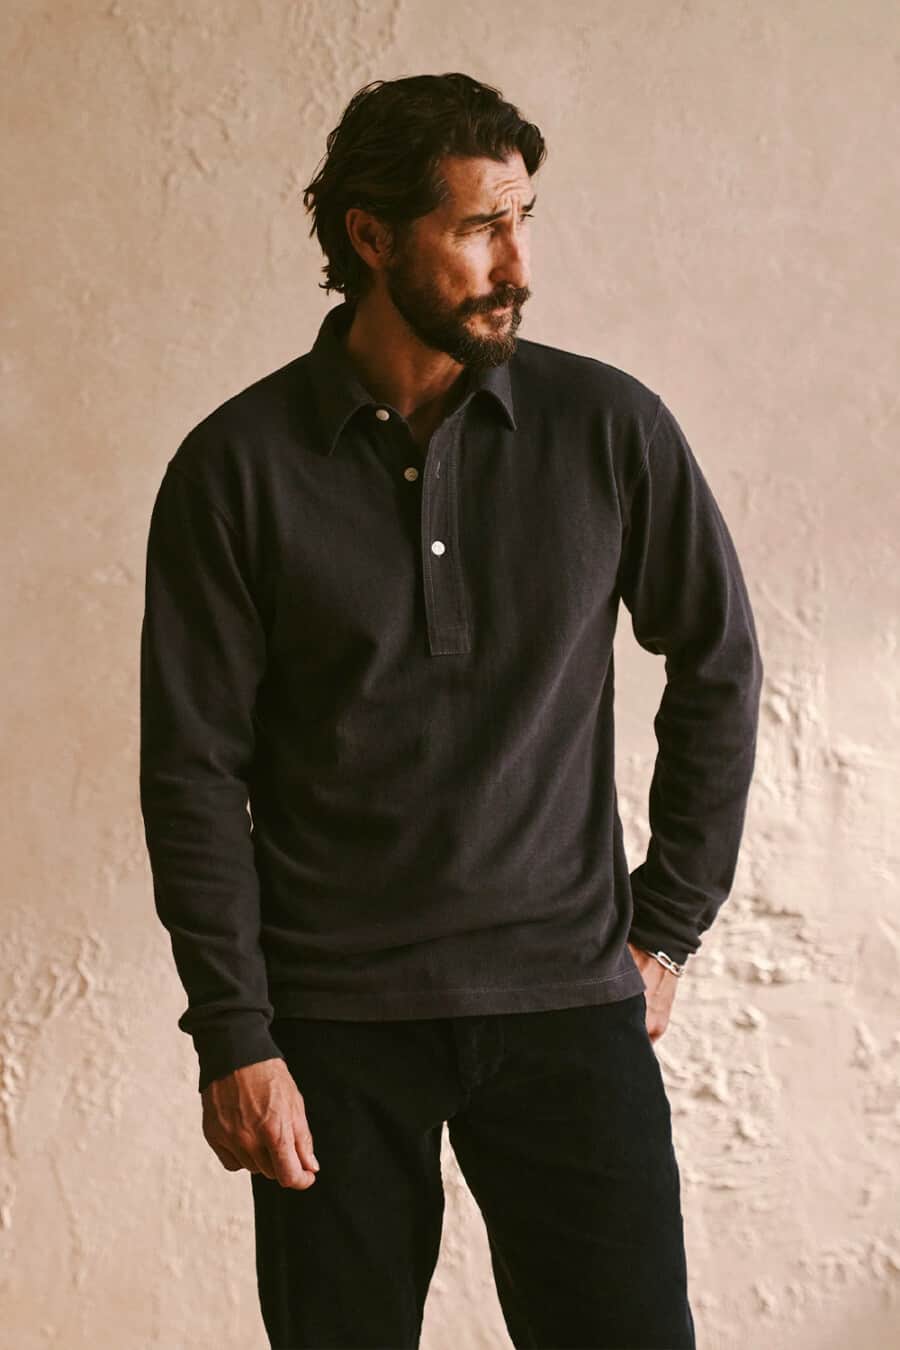 Man in his 40s wearing a black polo shirt and black jeans